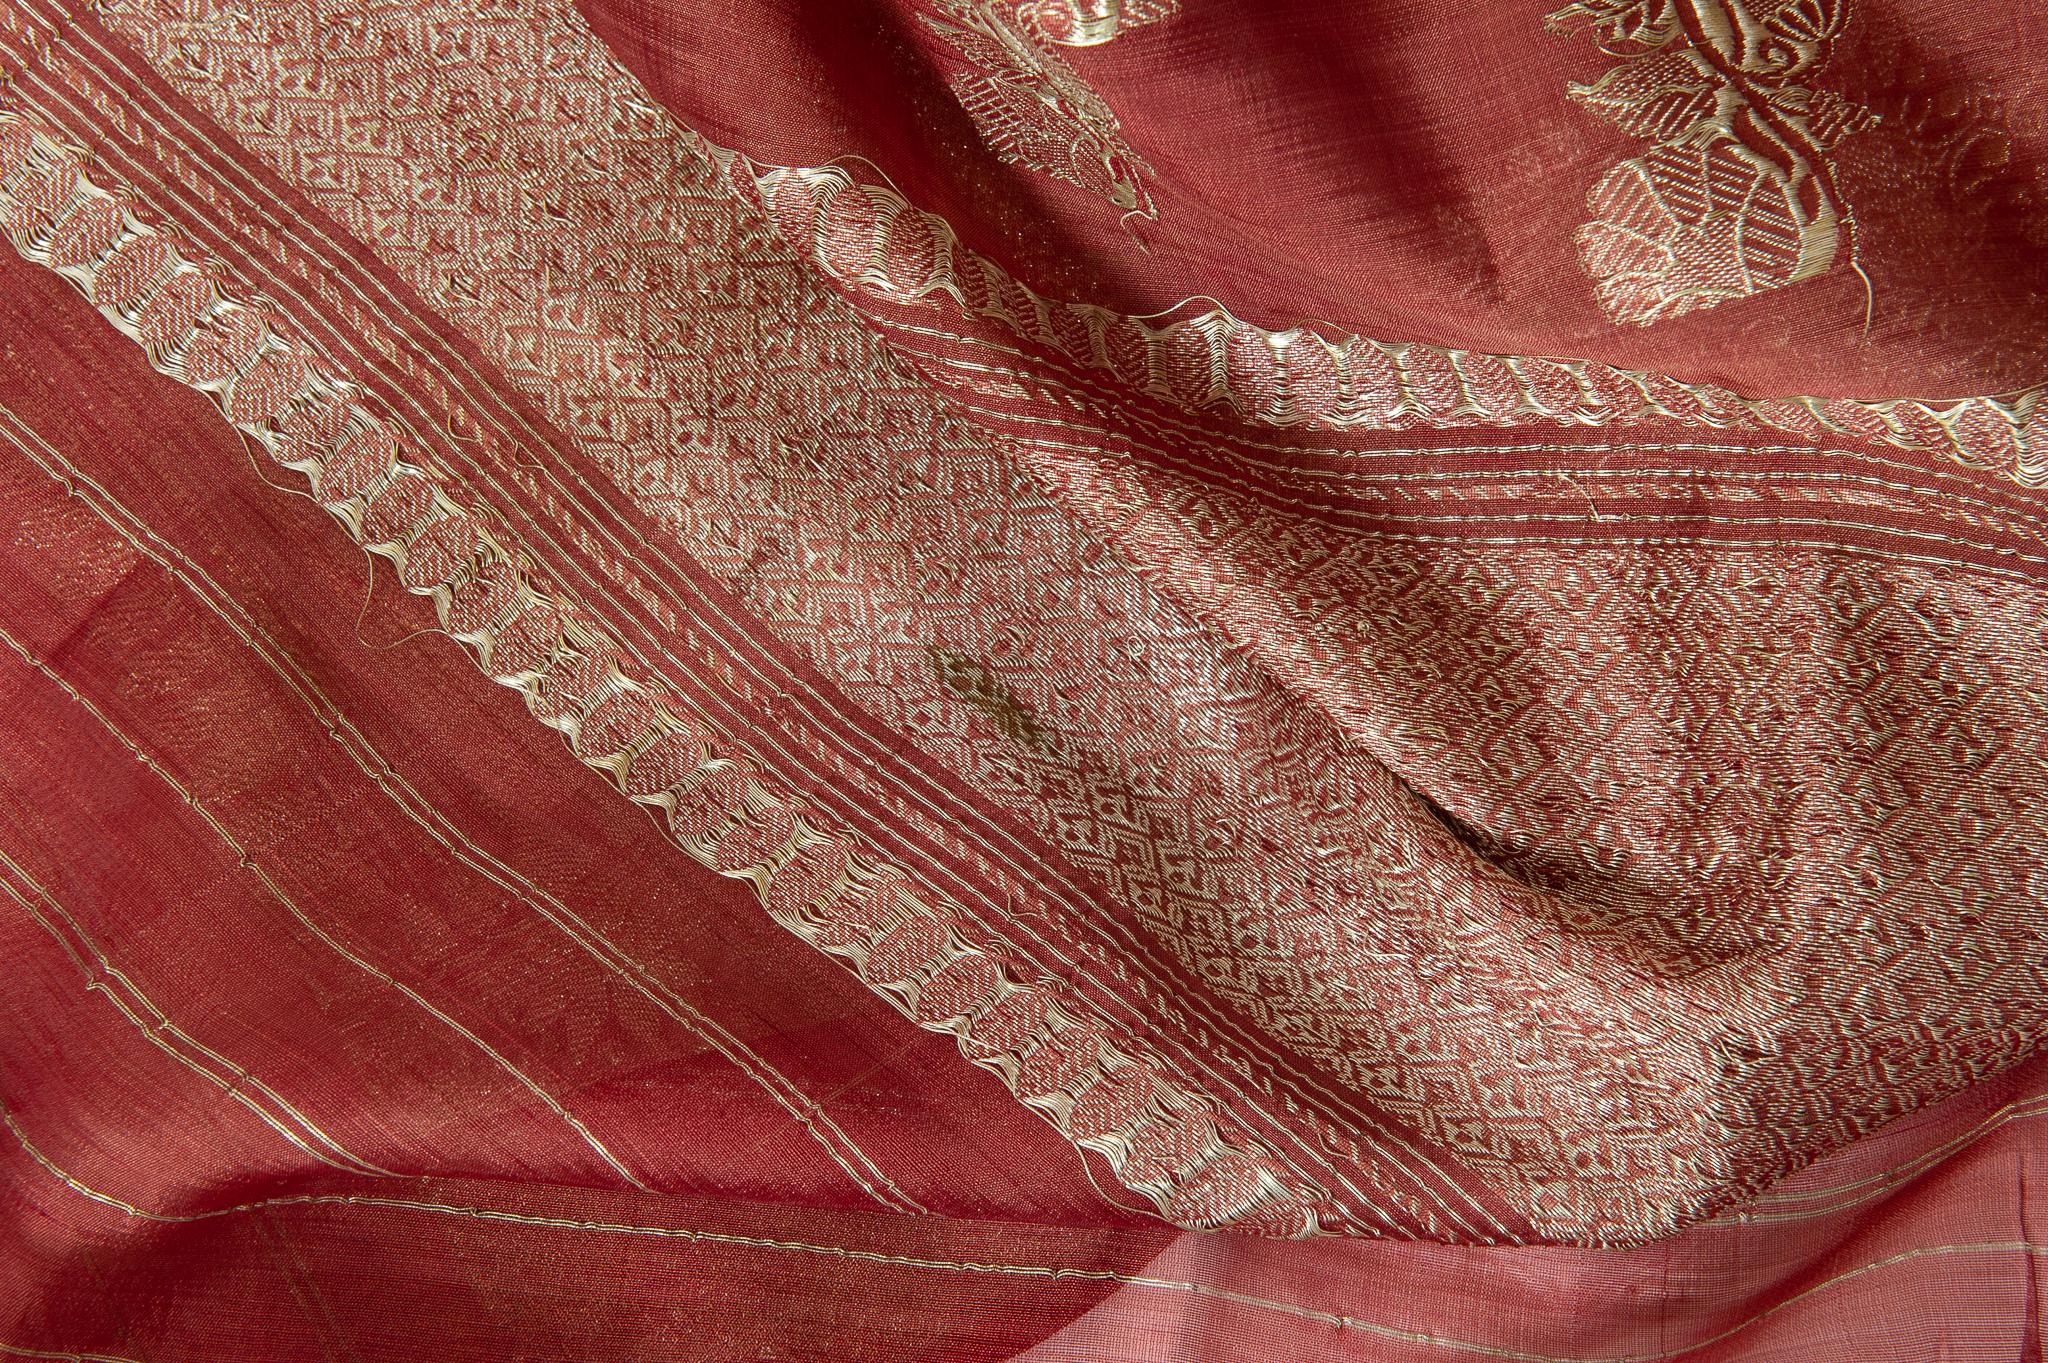 Embroidered Vintage Indian Sari Mauve Color for Curtains or Evening Dress For Sale